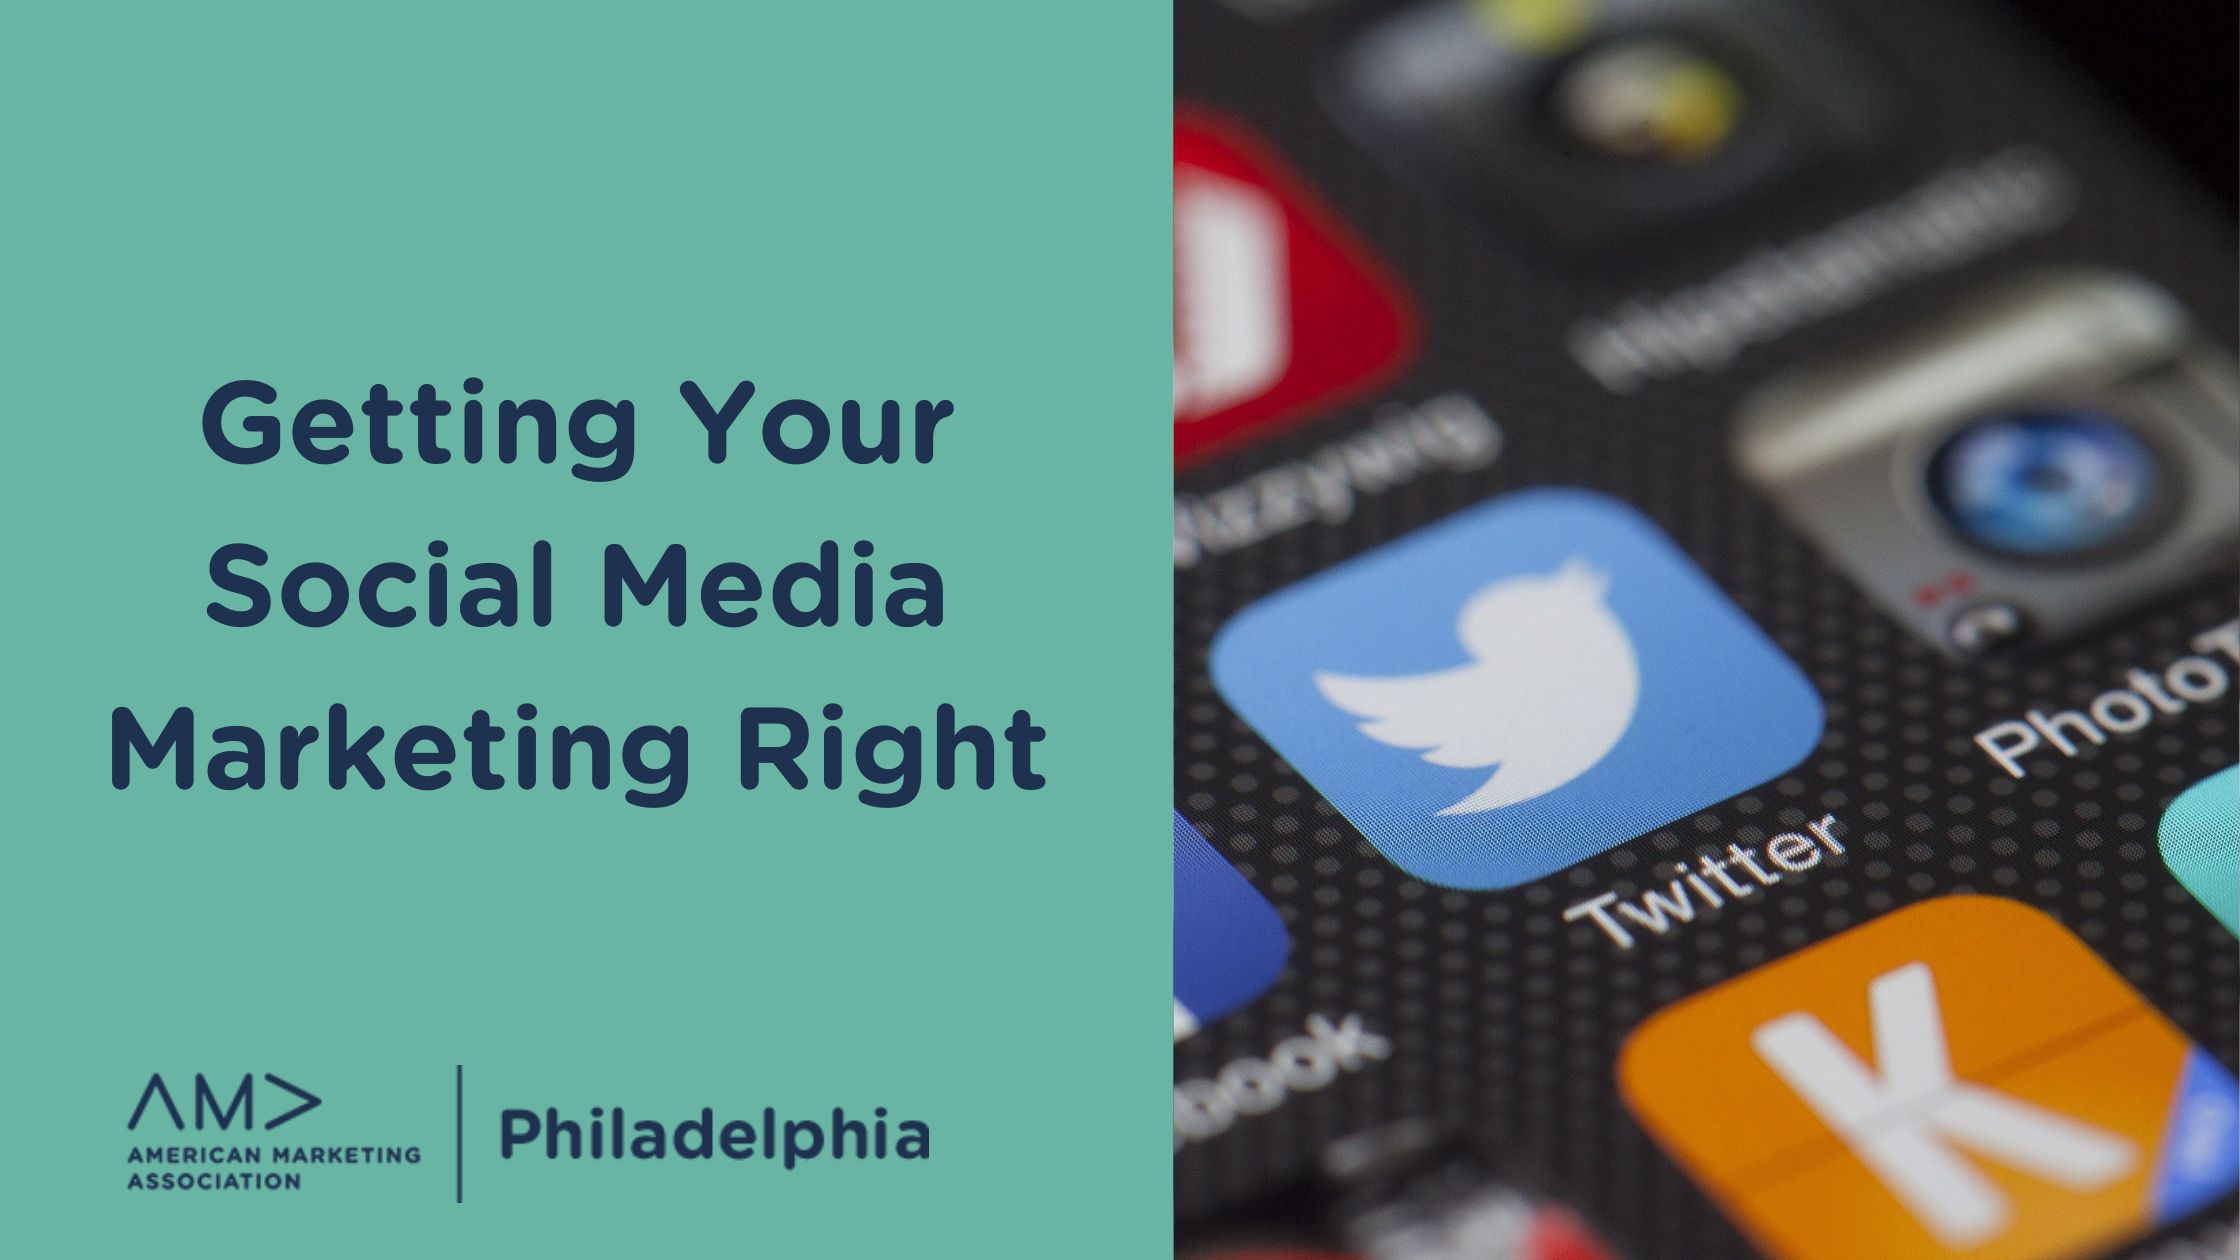 Getting Your Social Media Marketing Right